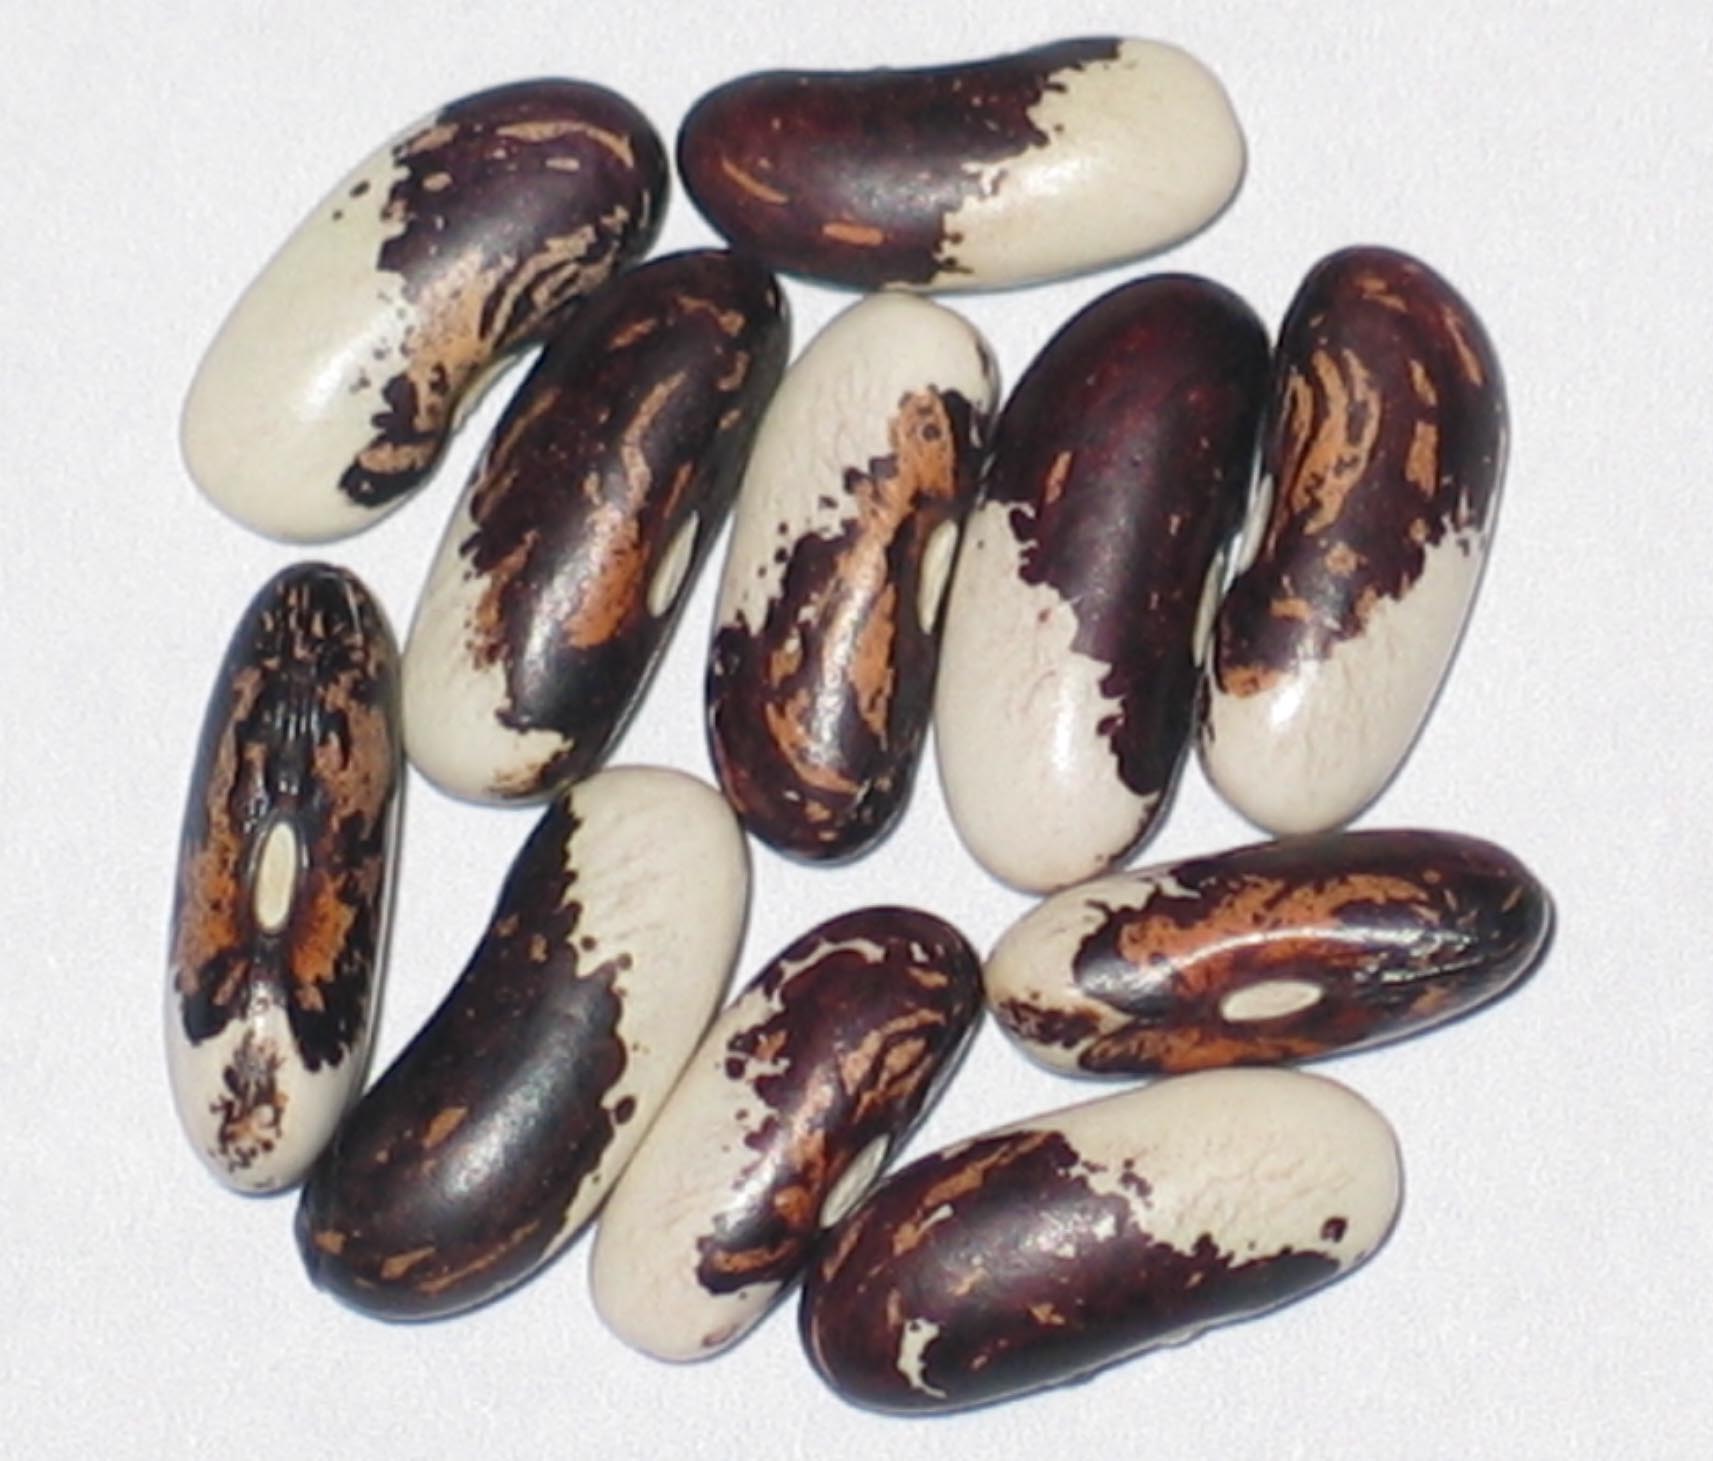 image of Vermont Appaloosa beans